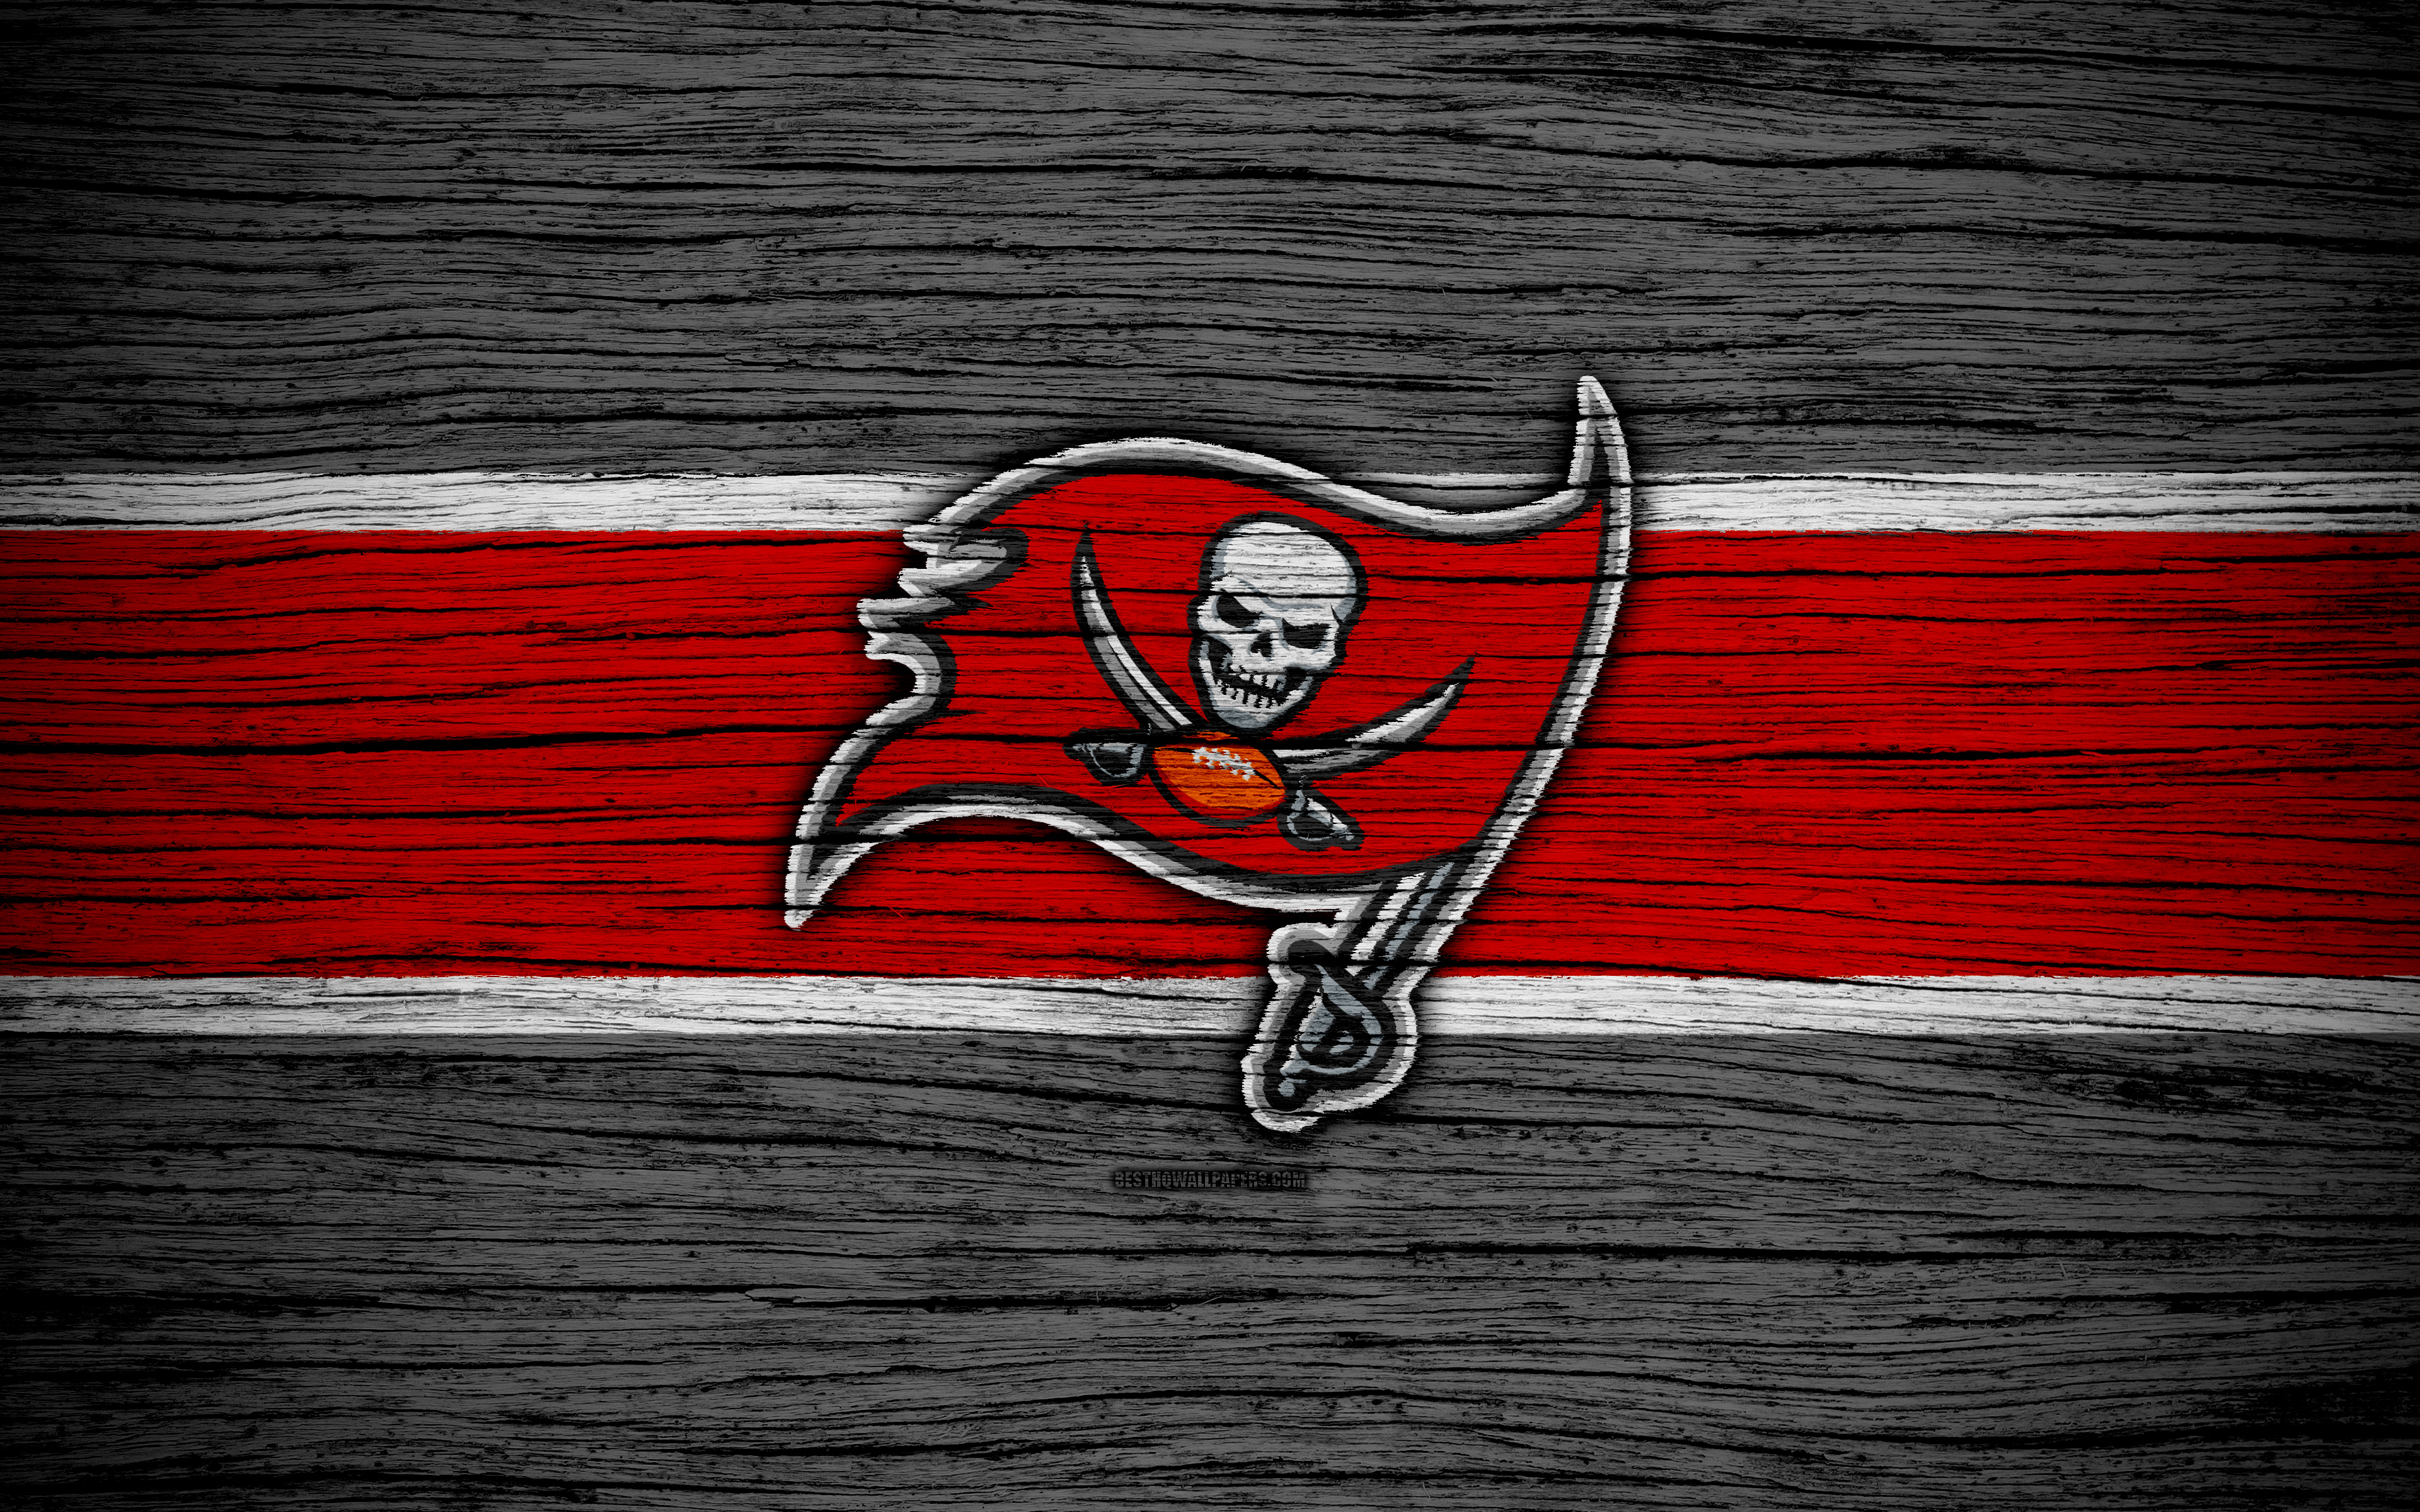 Download wallpaper Tampa Bay Buccaneers, 4k, wooden texture, NFL, american football, NFC, USA, art, logo, South Division for desktop with resolution 3840x2400. High Quality HD picture wallpaper